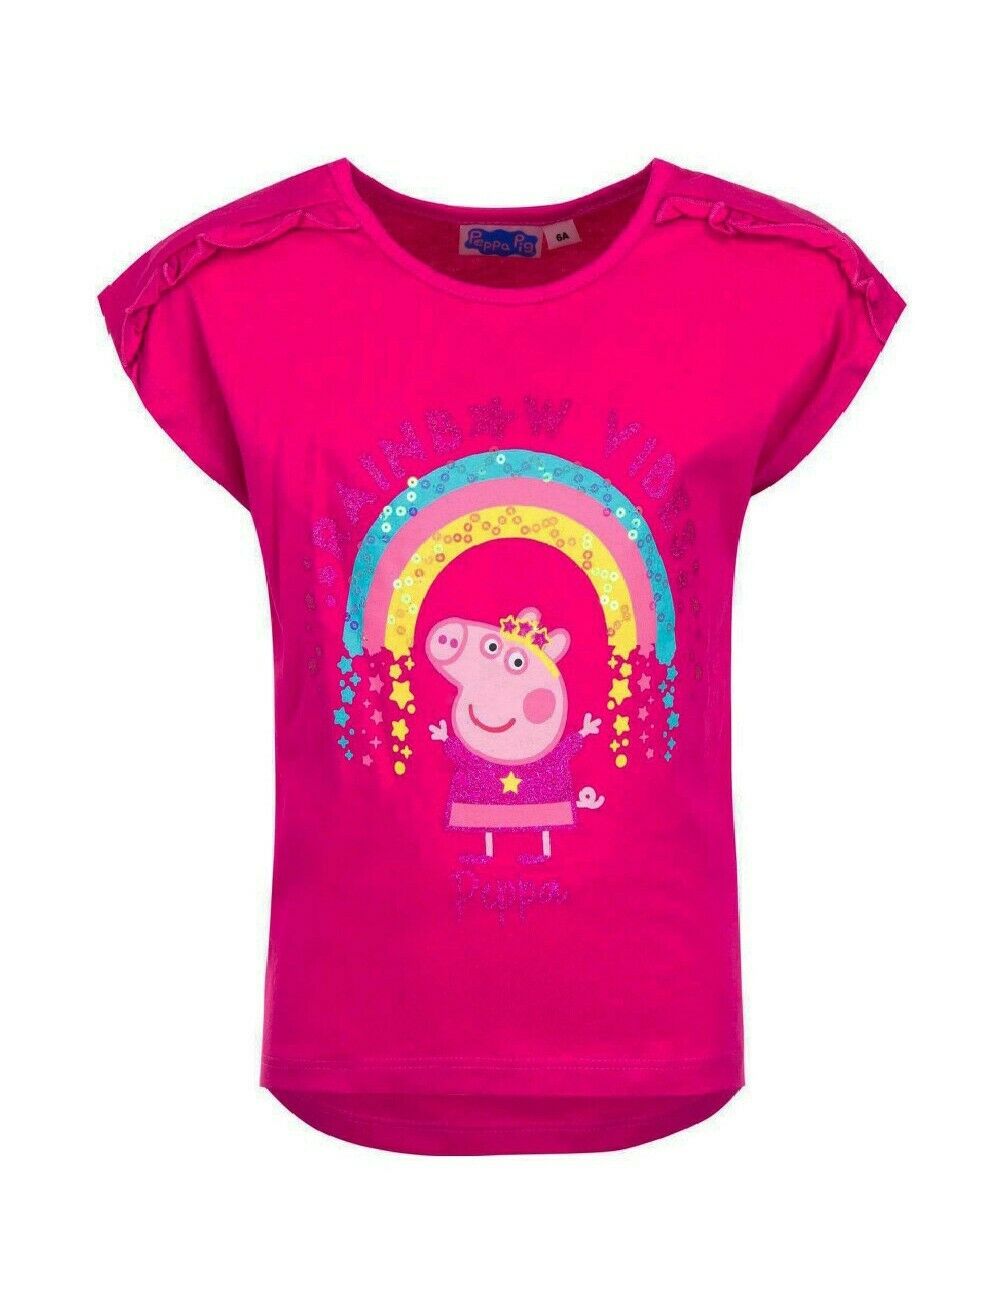 Peppa Pig Short Sleeve T-Shirts. Perfect For Any Peppa Pig Fan Available In Fuchsia. Age 3 to 6 Available. This Is Official Merchandise